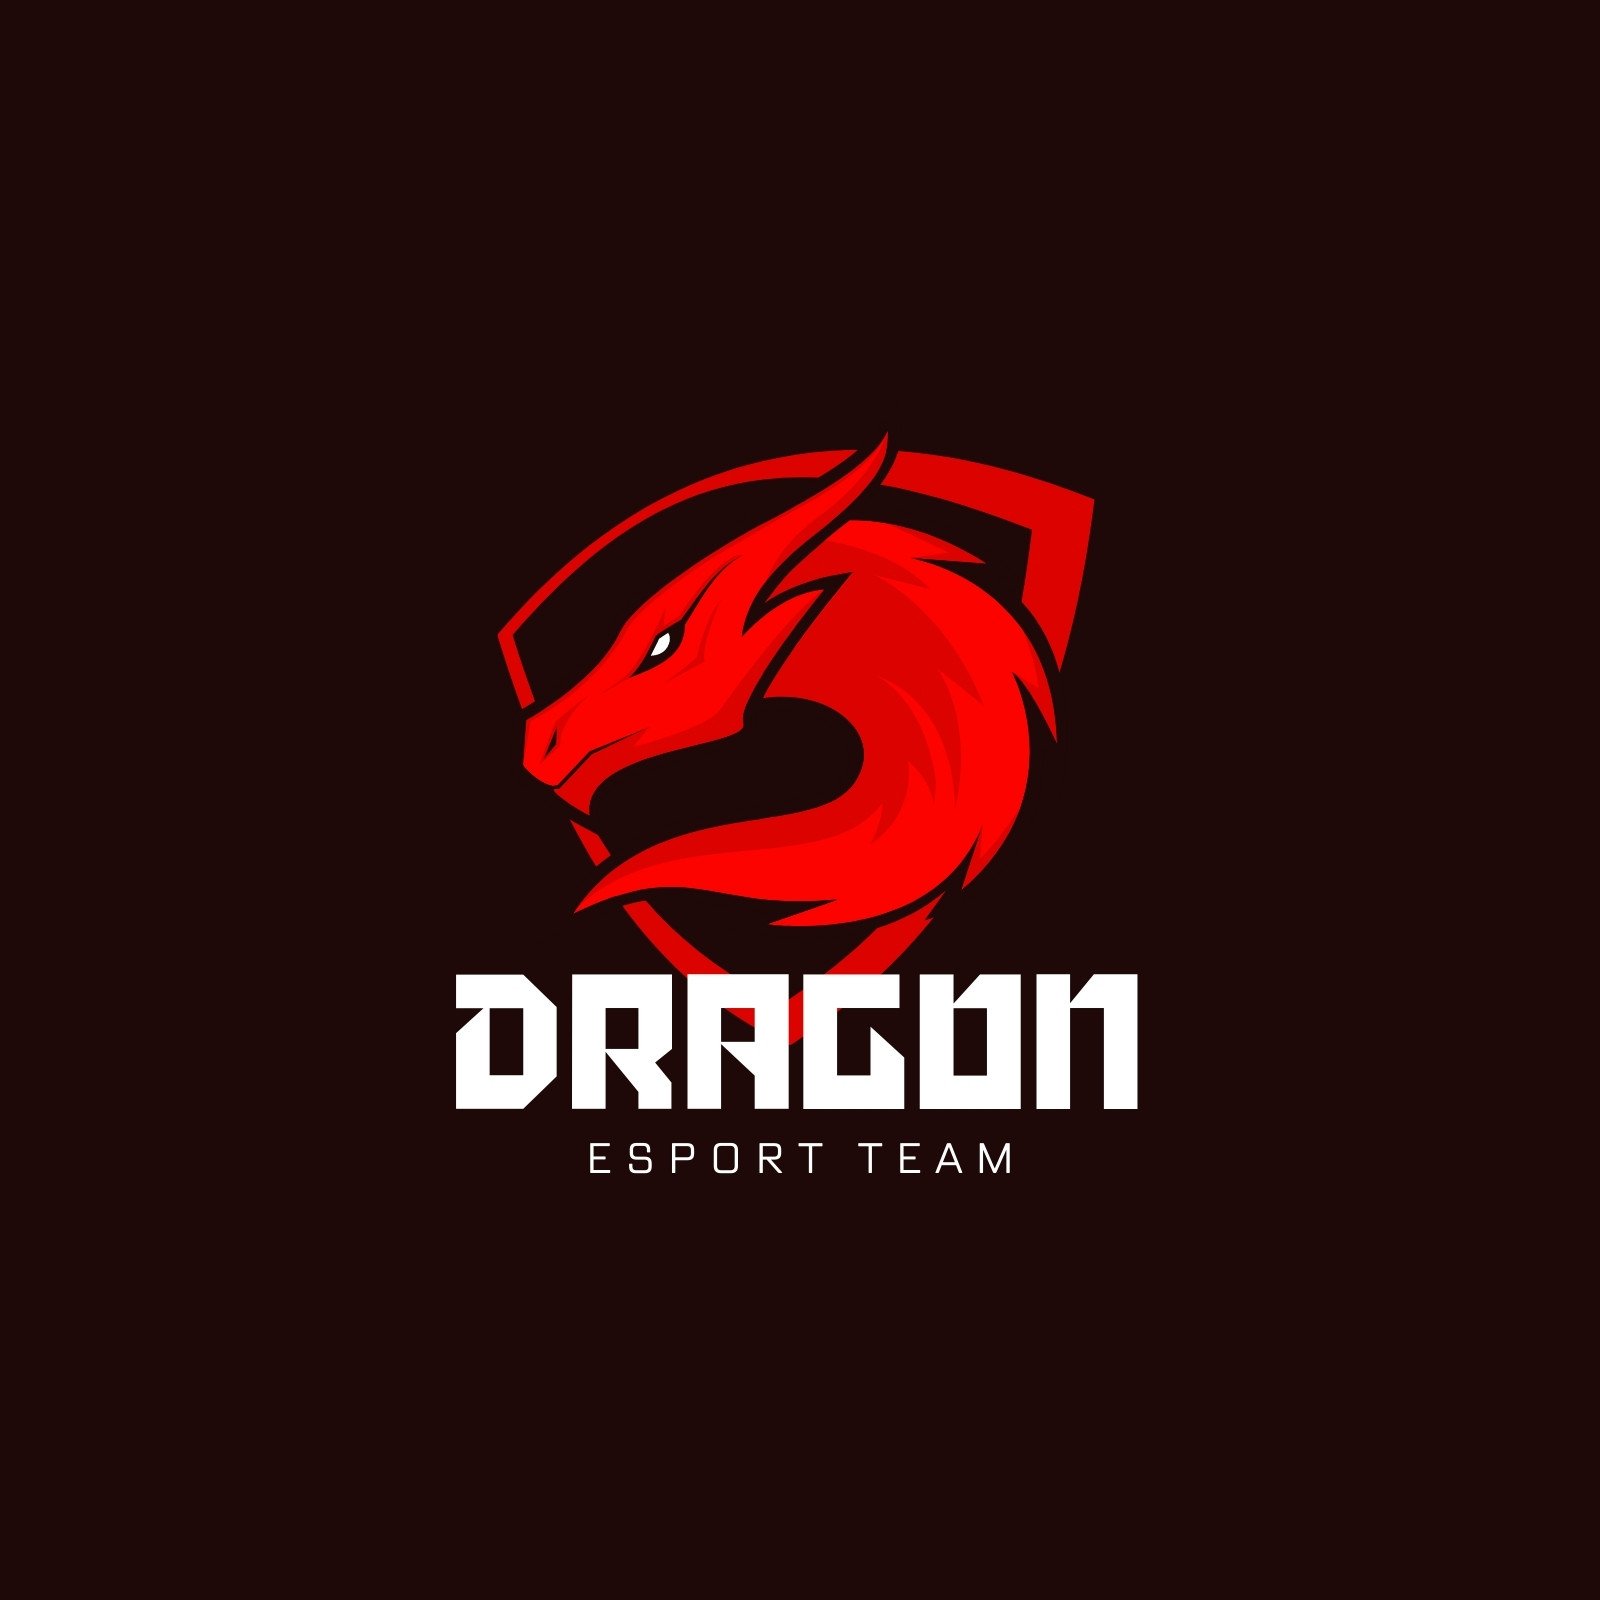 Where To Find The Best Gaming Logos - Design Hub